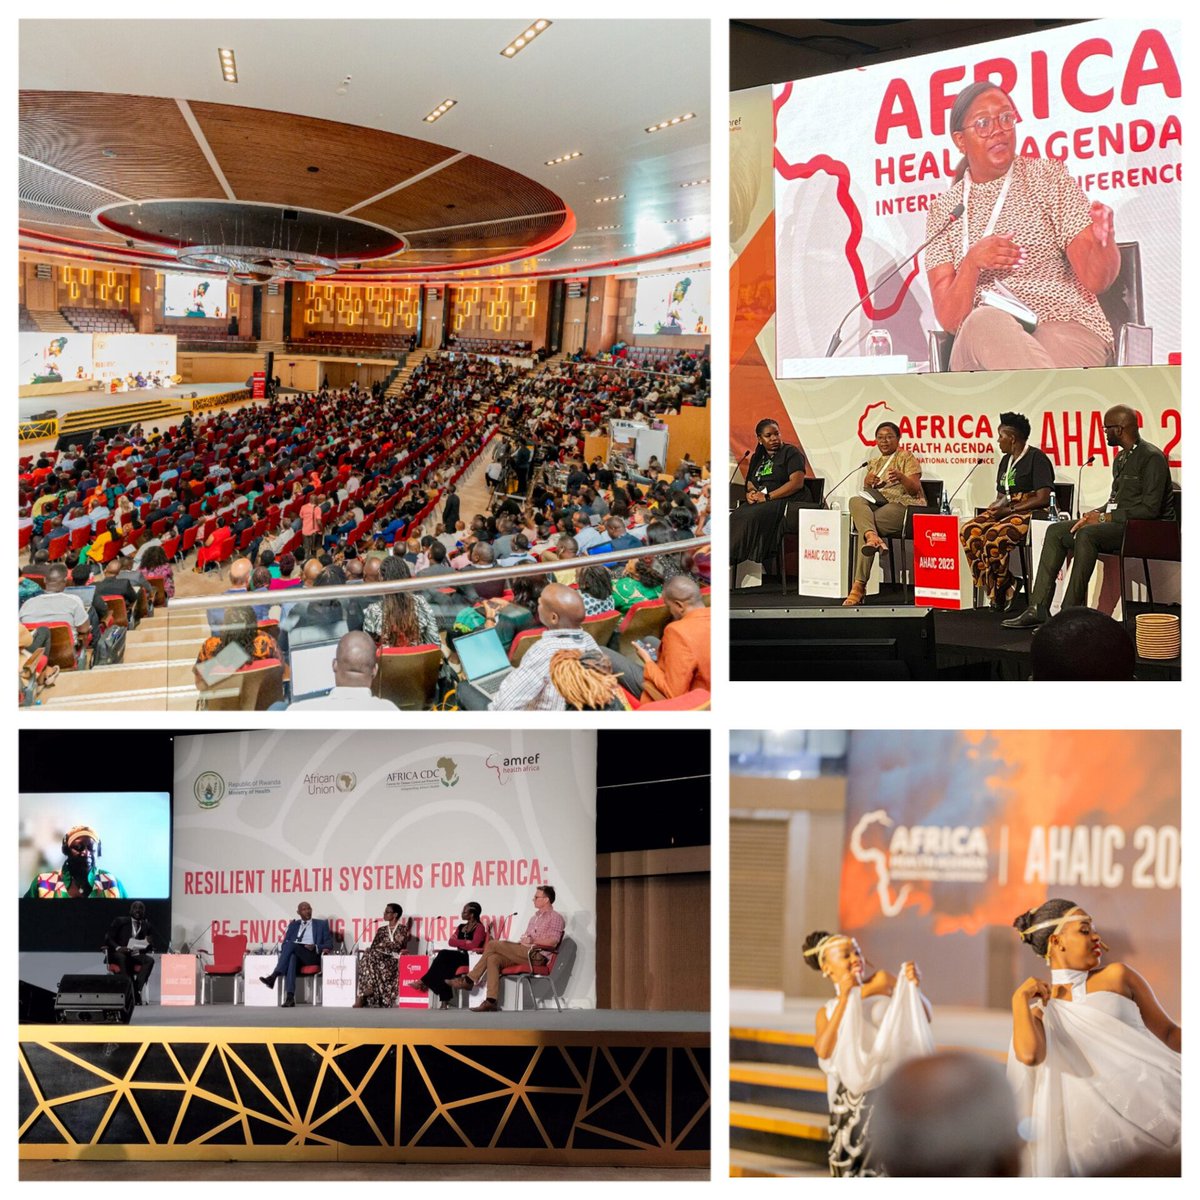 Congratulations @Daktari1, @DestaLakew, @BeingLolem & all @Amref_Worldwide staff for bringing together 2,400+ delegates from across the world to discuss developing resilient #healthsystems in Africa and reimagine a better future for all. #AHAIC2023